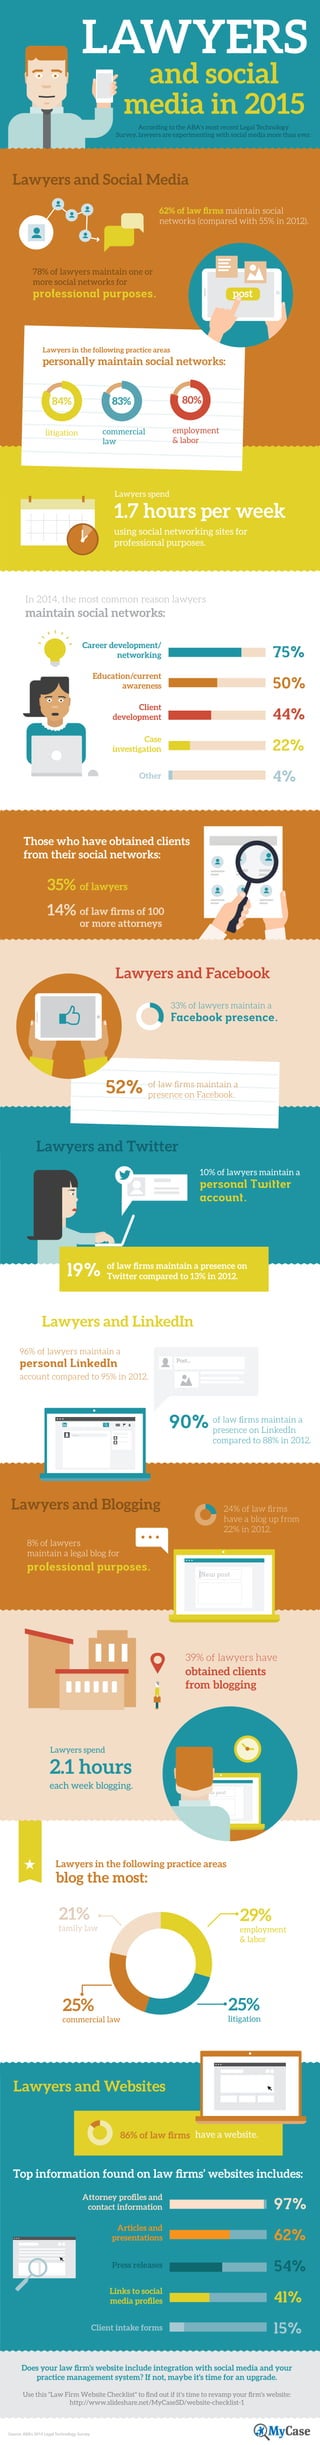 LAWYERS
and social
media in 2015
According to the ABA's most recent Legal Technology
Survey, lawyers are experimenting with social media more than ever.
Lawyers and Blogging 24% of law ﬁrms
have a blog up from
22% in 2012.
39% of lawyers have
obtained clients
from blogging
New post
Lawyers spend
each week blogging.
2.1 hours
29%
employment
& labor
25%
litigation
25%
commercial law
21%
family law
Lawyers in the following practice areas
blog the most:
8% of lawyers
maintain a legal blog for
professional purposes.
New post
Lawyers and Websites
Top information found on law ﬁrms’ websites includes:
62%
97%
41%
54%
Attorney proﬁles and
contact information
Articles and
presentations
Press releases
Links to social
media proﬁles
15%Client intake forms
Lawyers and Social Media
62% of law ﬁrms maintain social
networks (compared with 55% in 2012).
78% of lawyers maintain one or
more social networks for
professional purposes.
Lawyers spend
using social networking sites for
professional purposes.
1.7 hours per week
84%
litigation
83%
commercial
law
80%
employment
& labor
Lawyers in the following practice areas
personally maintain social networks:
post
In 2014, the most common reason lawyers
maintain social networks:
50%
75%
22%
44%
Career development/
networking
Education/current
awareness
Client
development
Case
investigation
4%Other
of lawyers
of law ﬁrms of 100
or more attorneys
Those who have obtained clients
from their social networks:
35%
14%
Lawyers and Facebook
of law ﬁrms maintain a
presence on Facebook.52%
33% of lawyers maintain a
Facebook presence.
Lawyers and Twitter
10% of lawyers maintain a
personal Twitter
account.
Lawyers and LinkedIn
96% of lawyers maintain a
account compared to 95% in 2012.
personal LinkedIn Post...
+
Post...
of law ﬁrms maintain a
presence on LinkedIn
compared to 88% in 2012.
90%
of law ﬁrms maintain a presence on
Twitter compared to 13% in 2012.19%
Does your law ﬁrm's website include integration with social media and your
practice management system? If not, maybe it's time for an upgrade.
Use this "Law Firm Website Checklist" to ﬁnd out if it's time to revamp your ﬁrm's website:
http://www.slideshare.net/MyCaseSD/website-checklist-1
86% of law ﬁrms have a website.
Source: ABA's 2014 Legal Technology Survey
 